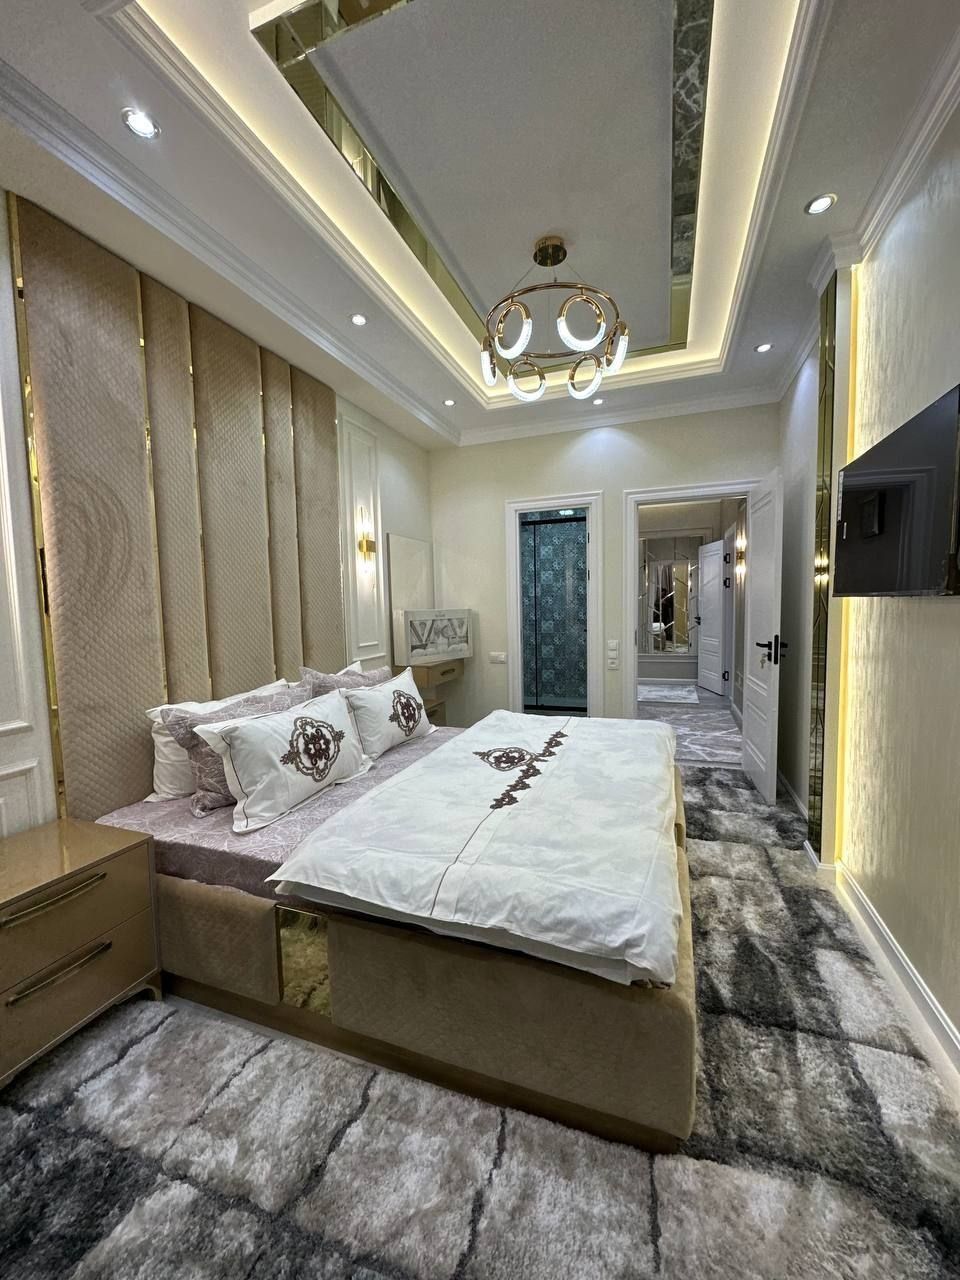 Apartment for rent in Tashkent city from 850 y.e